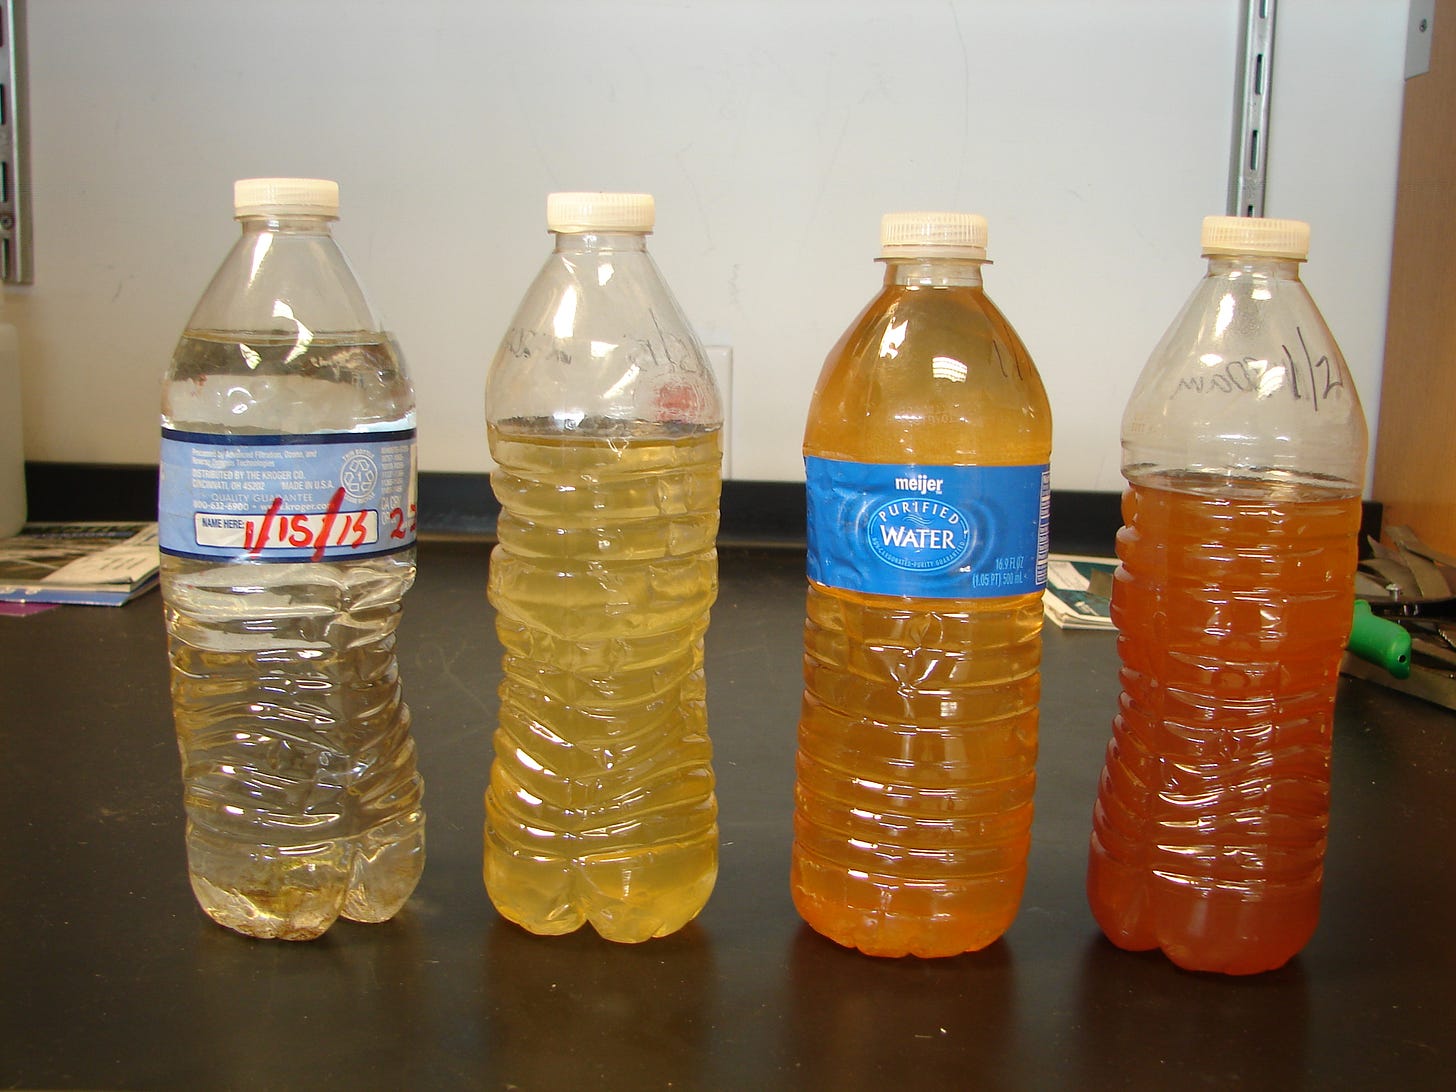 This image provided by FlintWaterStudy.org shows water samples from a Flint, Mich. home. The bottles were collected, from left, on Jan. 15 (2), Jan. 16 and Jan. 21, 2015. (FlintWaterStudy.org)